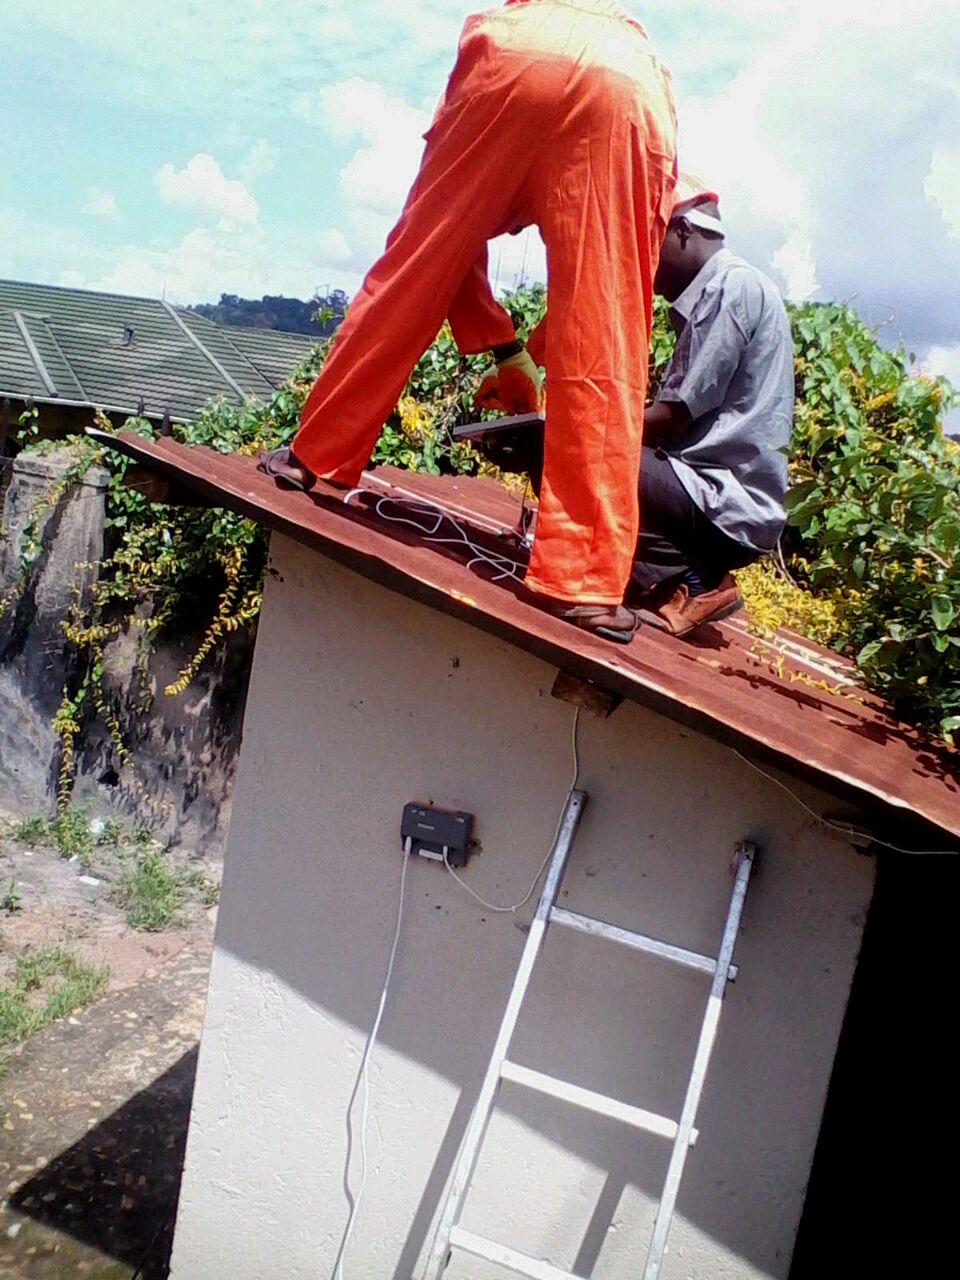 Learning soalr panel installation on the roof. At Barefoot Power..jpg